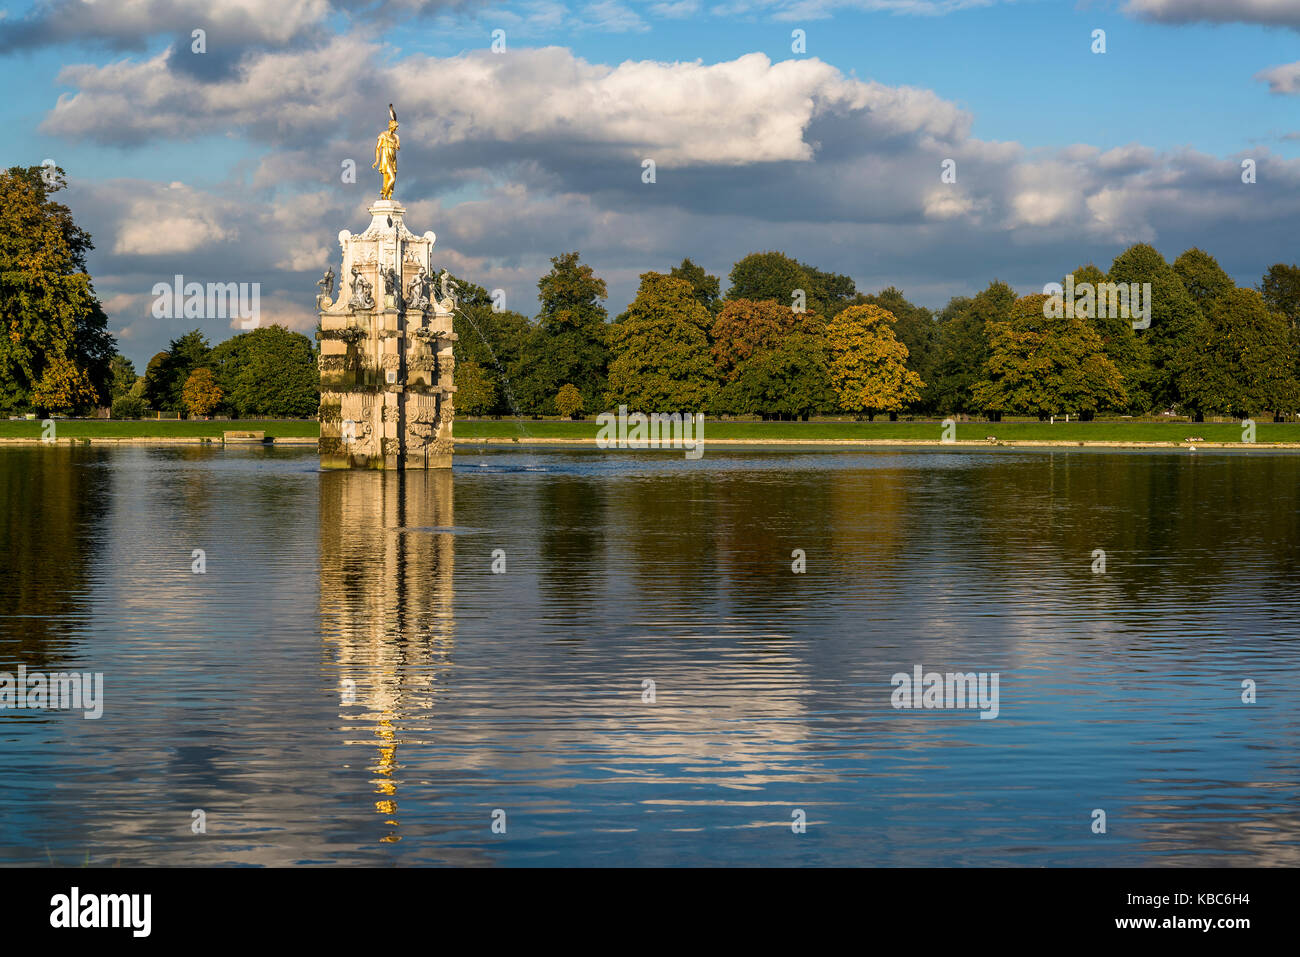 Diana Fountain, a seventeenth-century statue ensemble and water feature in an eighteenth-century setting, Bushy Park, London, England, UK Stock Photo